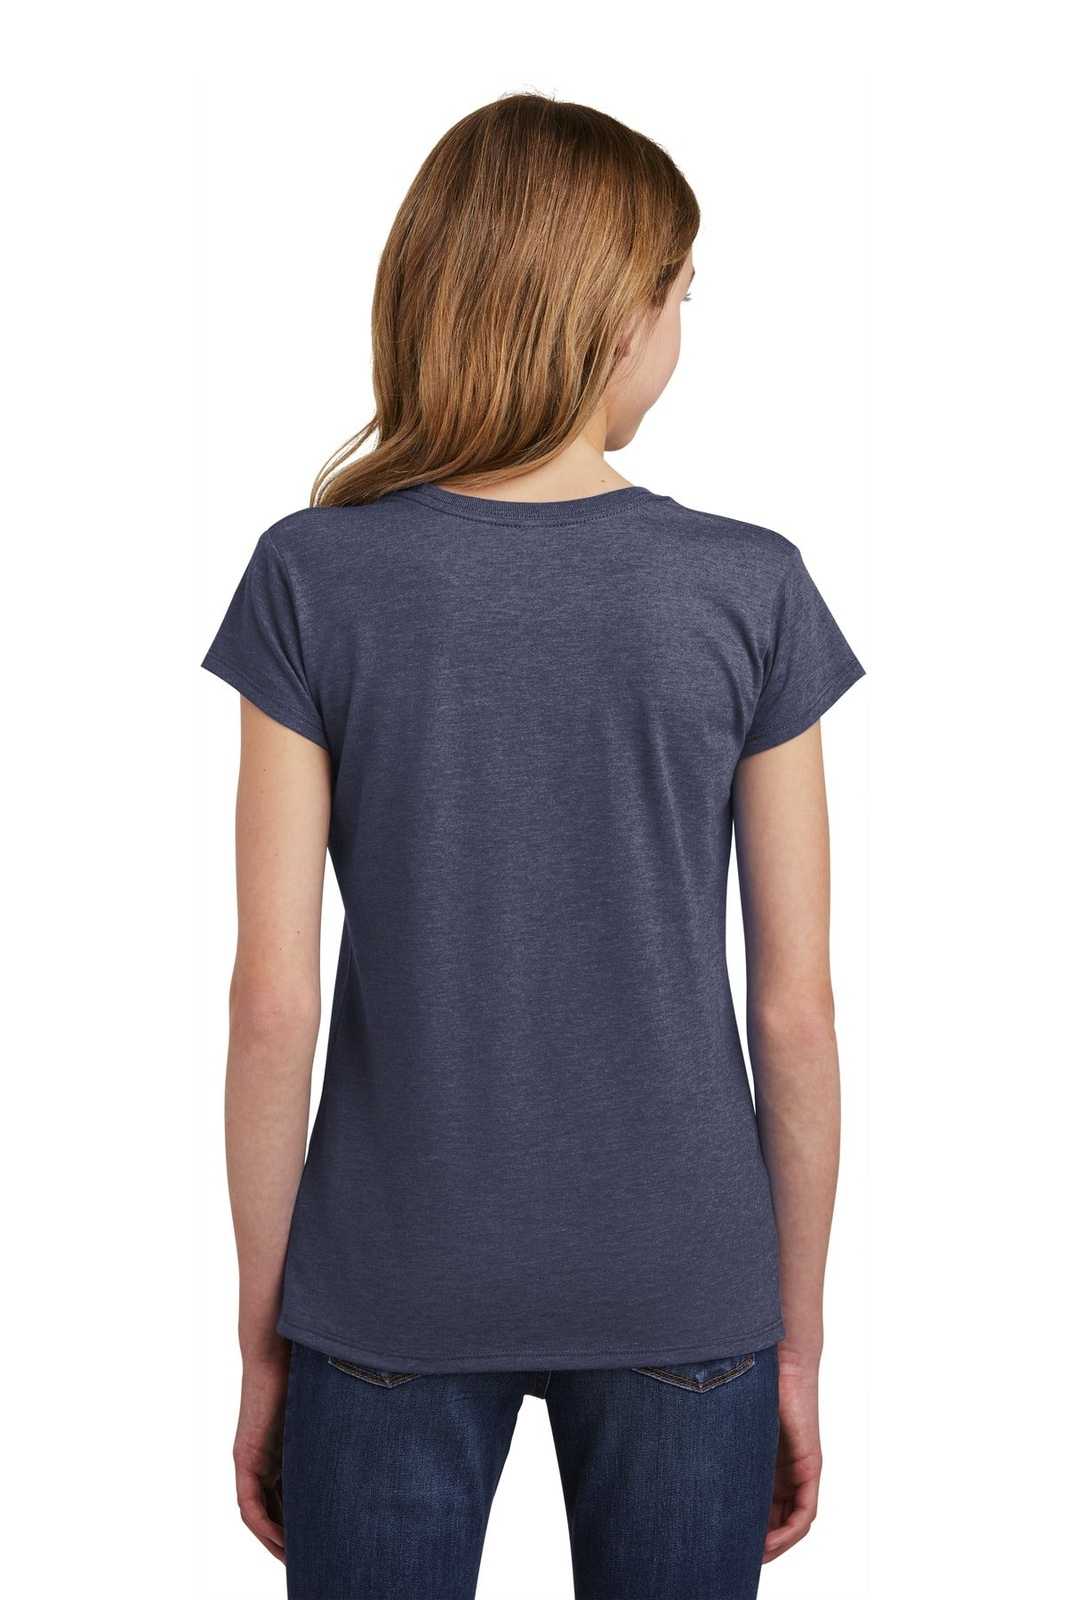 District DT6001YG Girls Very Important Tee - Heathered Navy - HIT a Double - 2